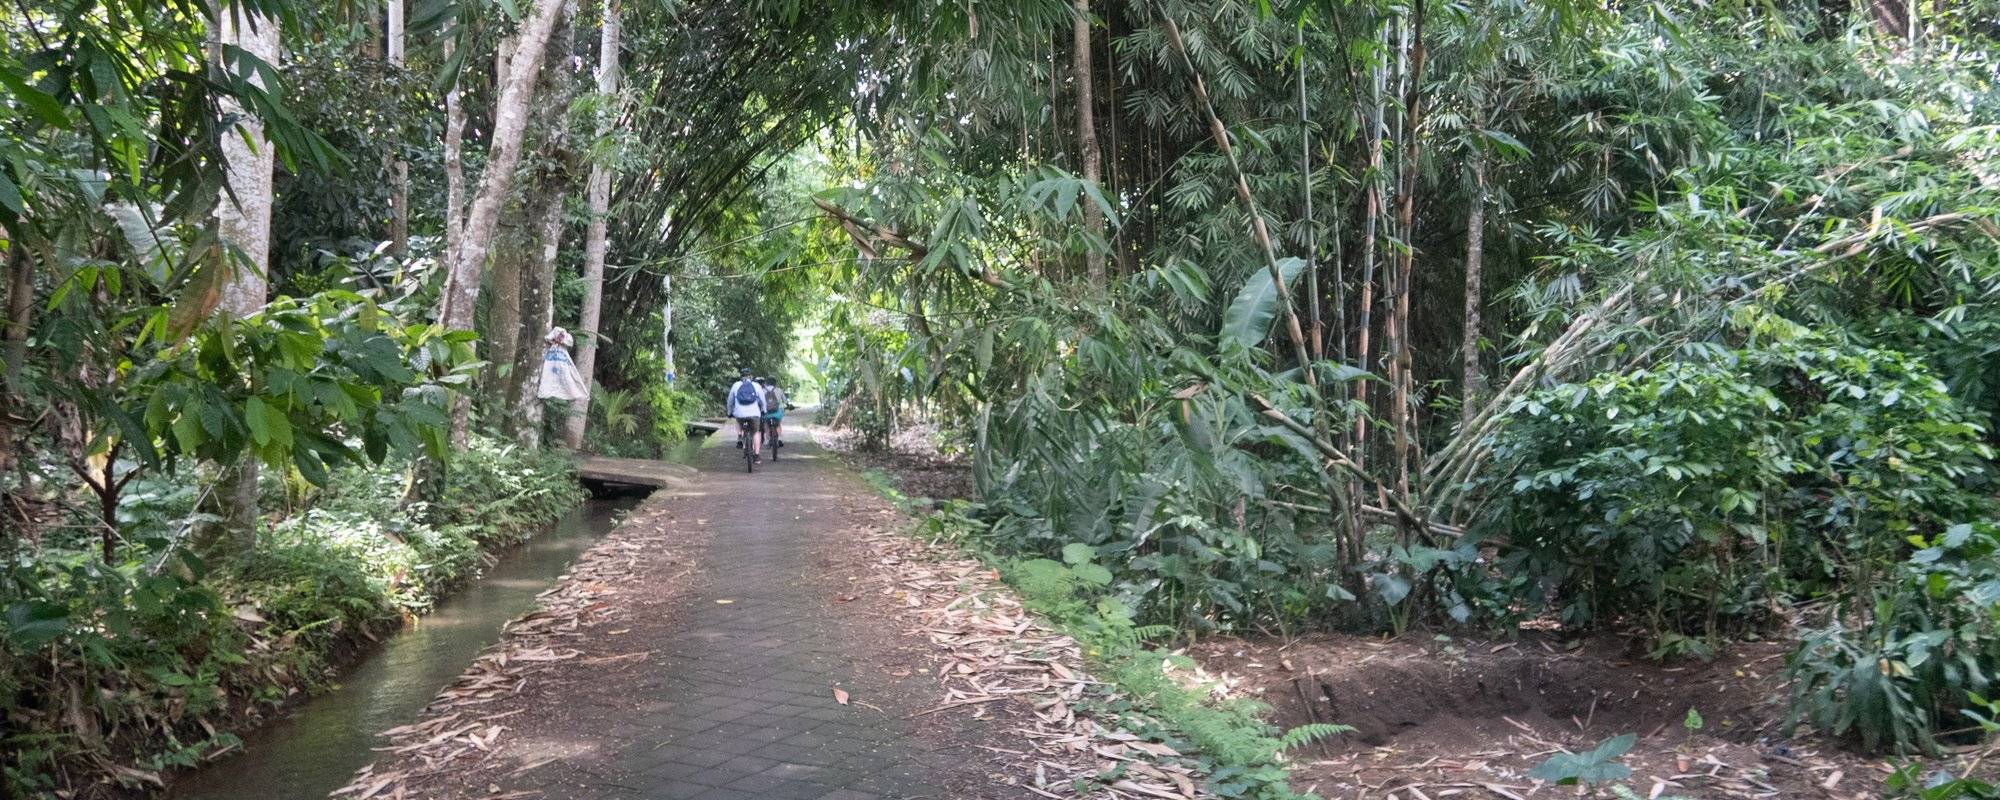 A Cyling Trip Through Villages in Bali